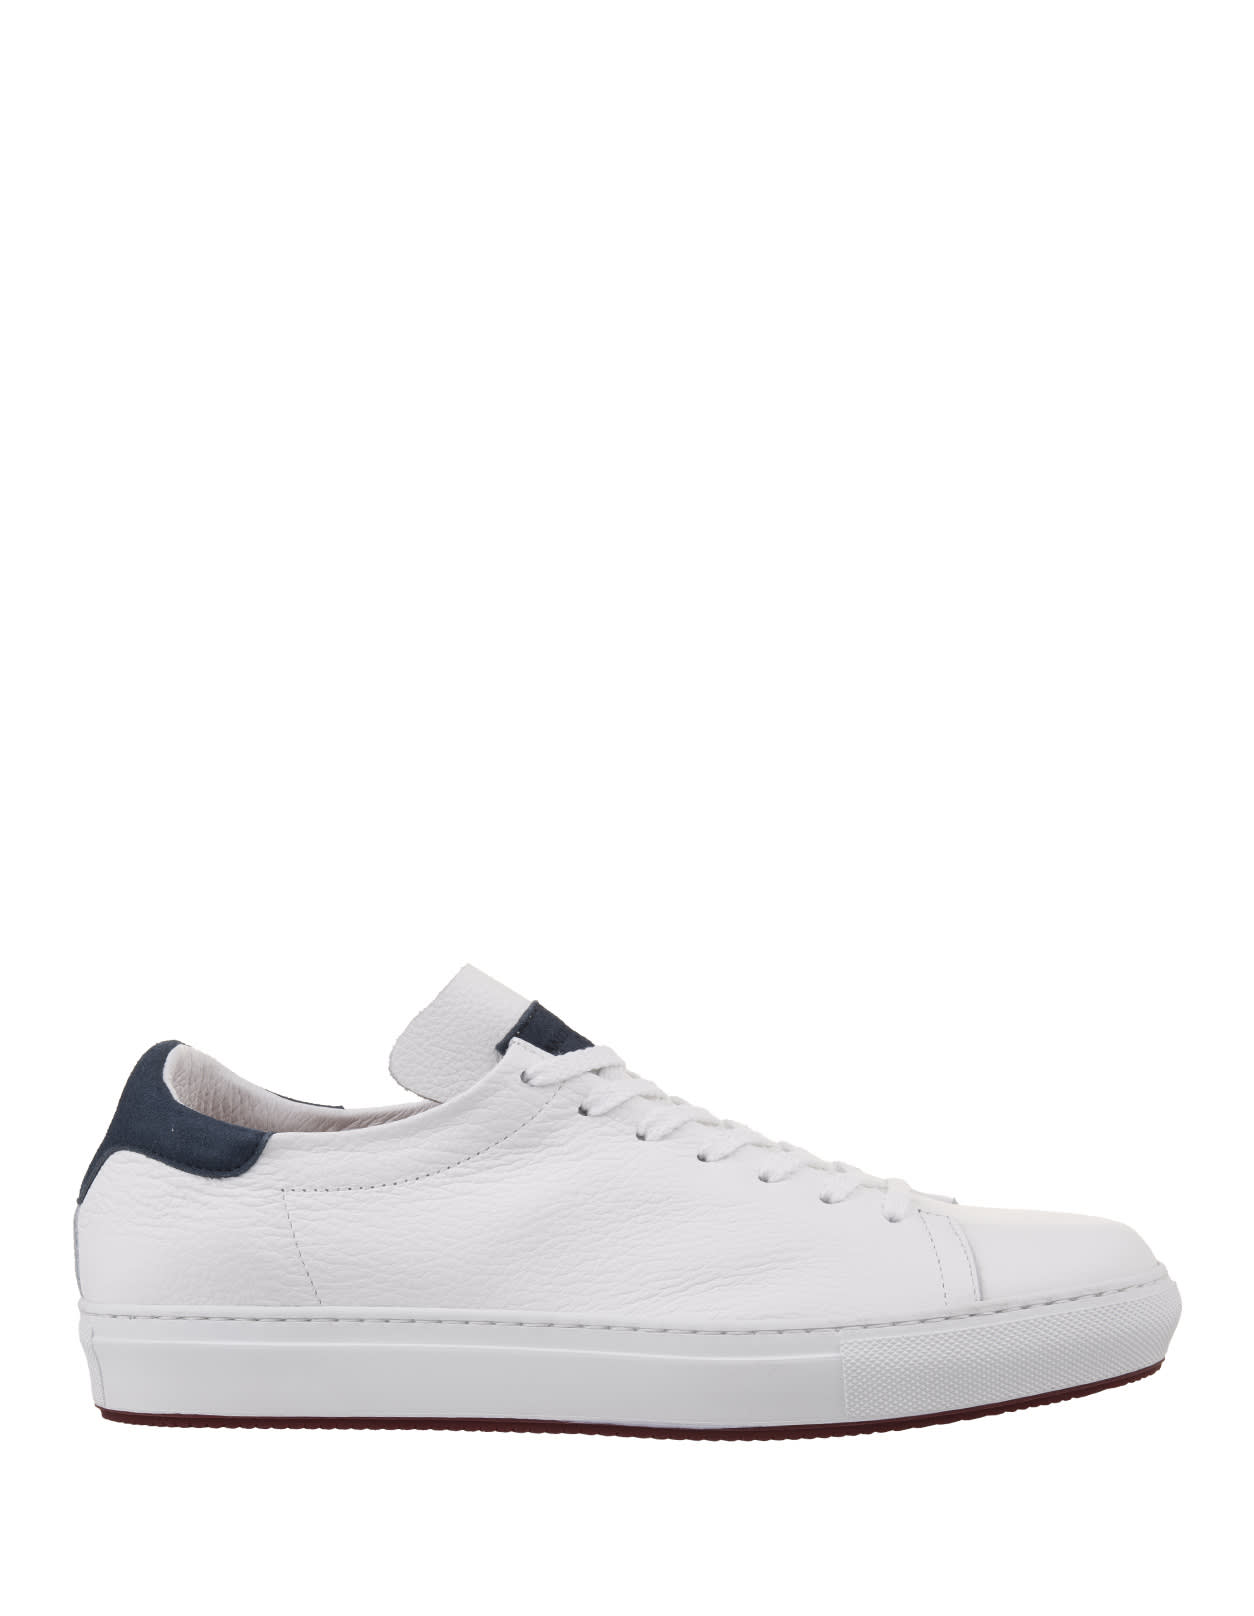 White Leather Sneakers With Blue Spoiler